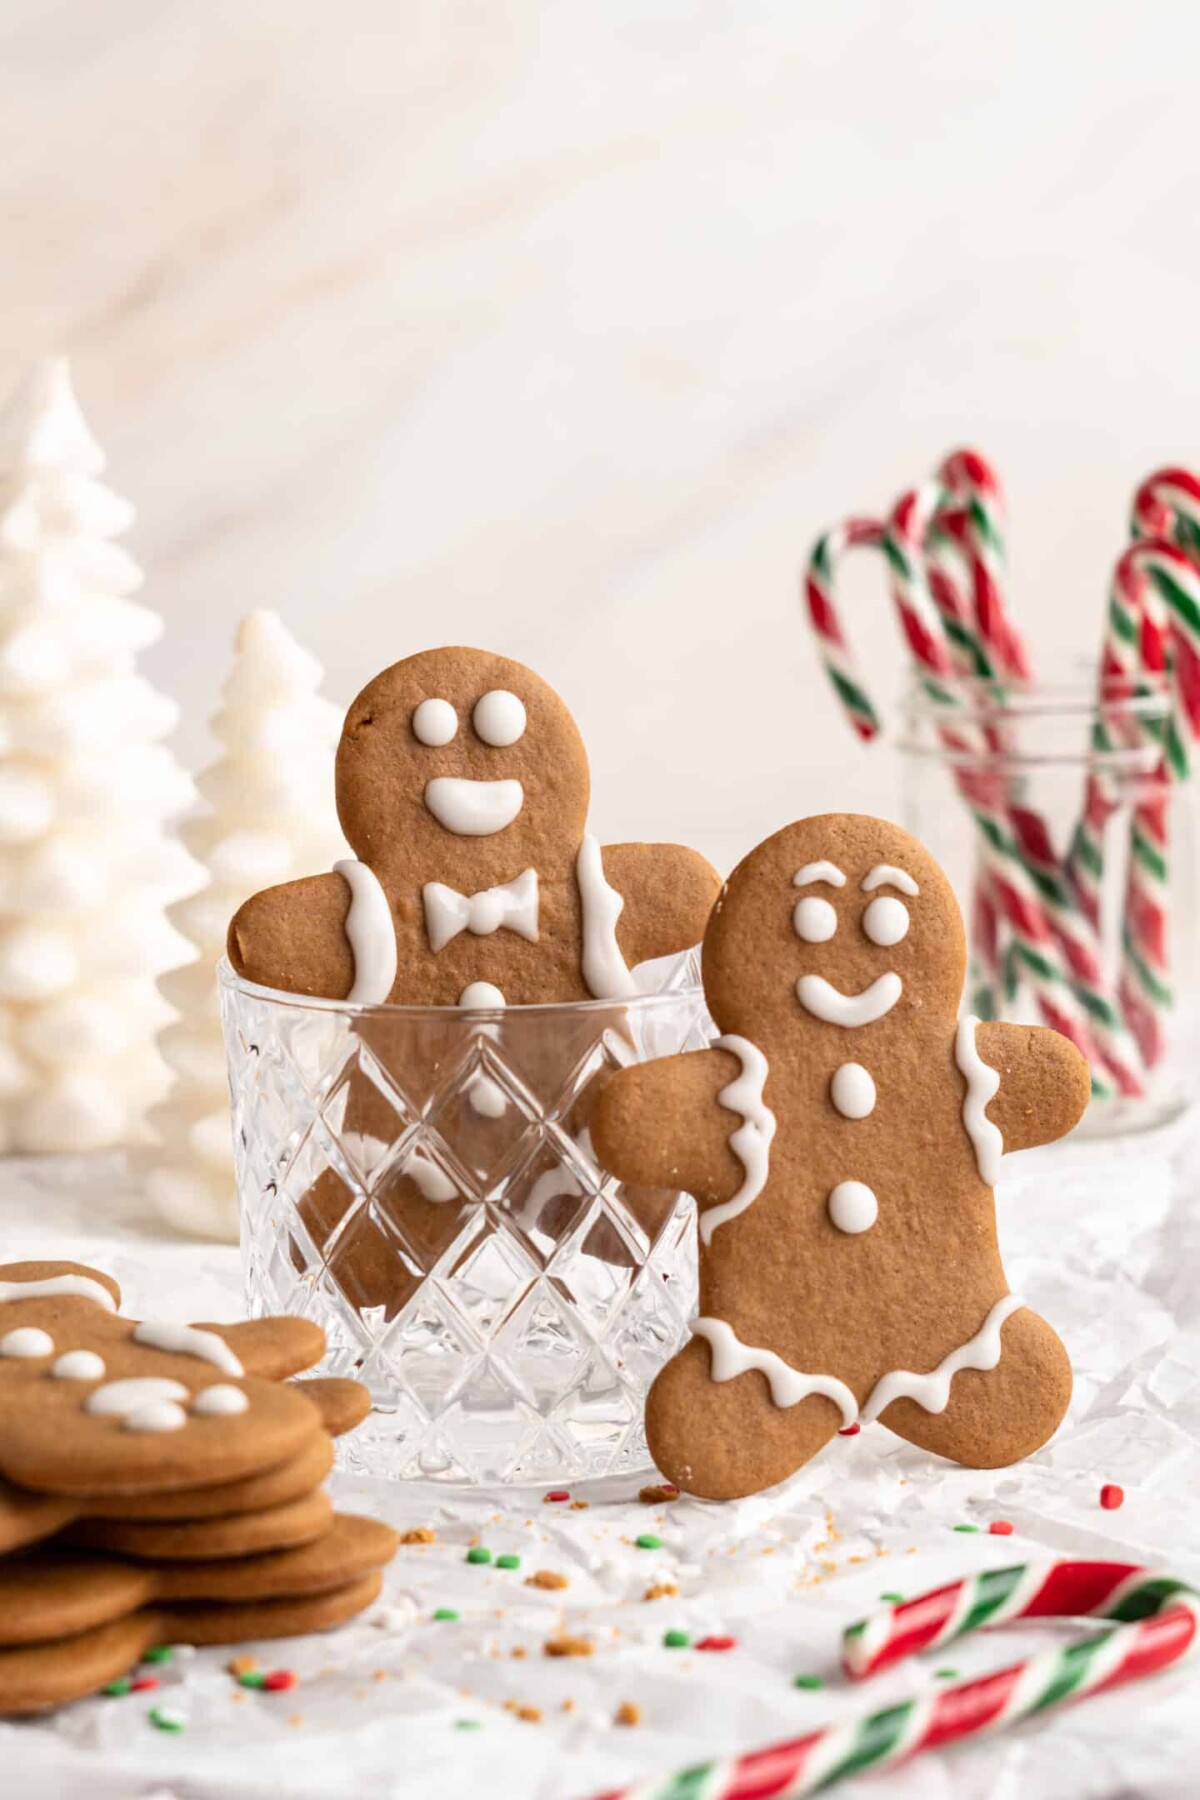 Two gingerbread men standing upright, one in a glass cup, next to a stack of gingerbread men, with a cup of candy canes in the background